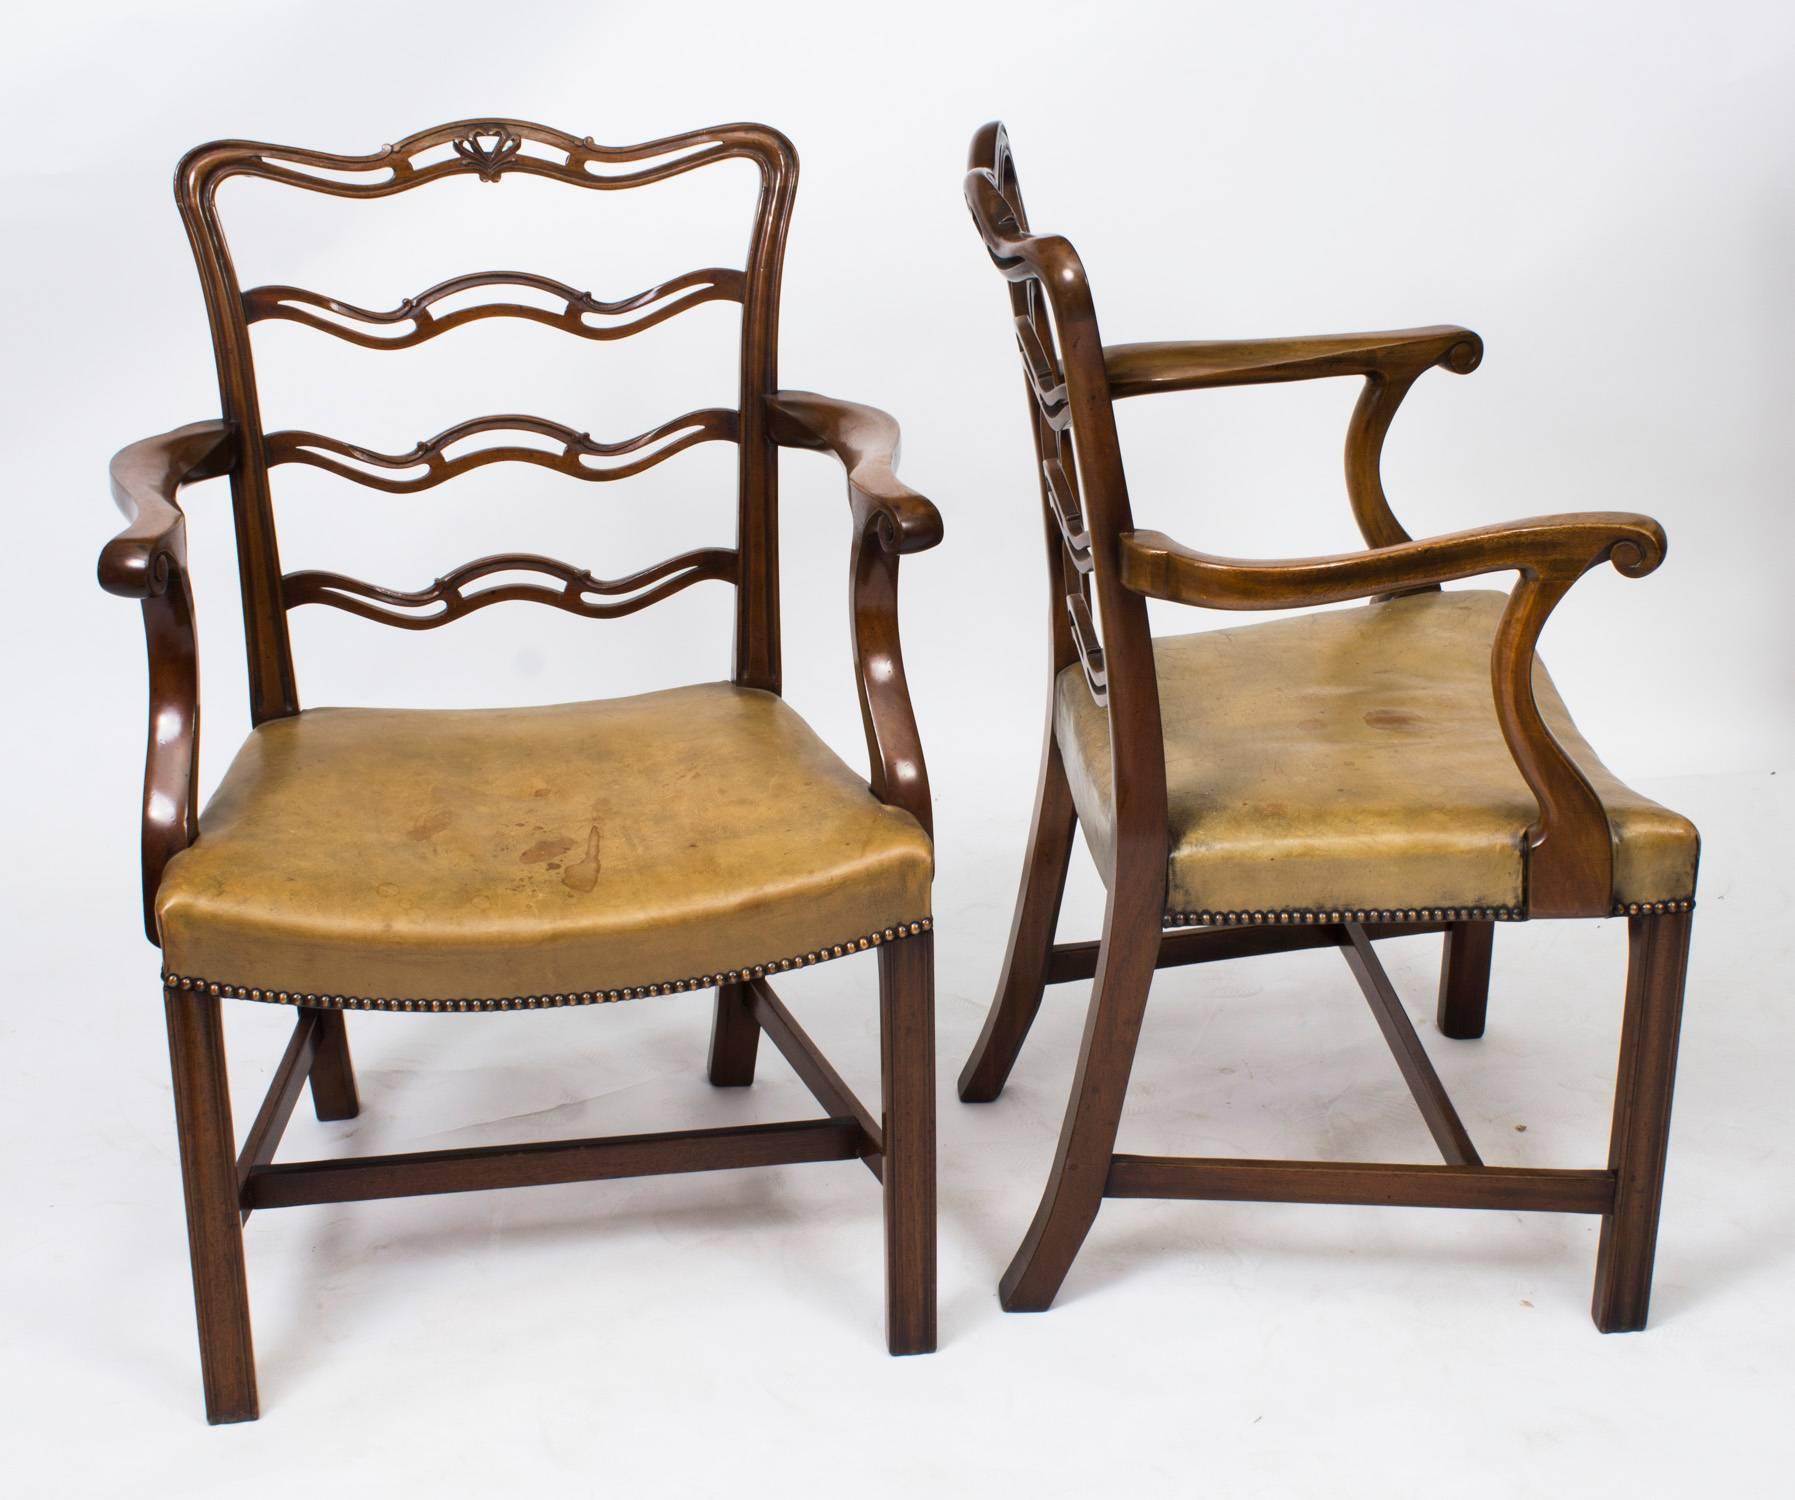 This is a beautiful set of eight vintage Chippendale style Ladderback dining chairs, comprising six side chairs and two armchairs, C1920 in date.

They were purchased at great expense from Harrods, in Knightsbridge, London on the 8th Jan 1982 and